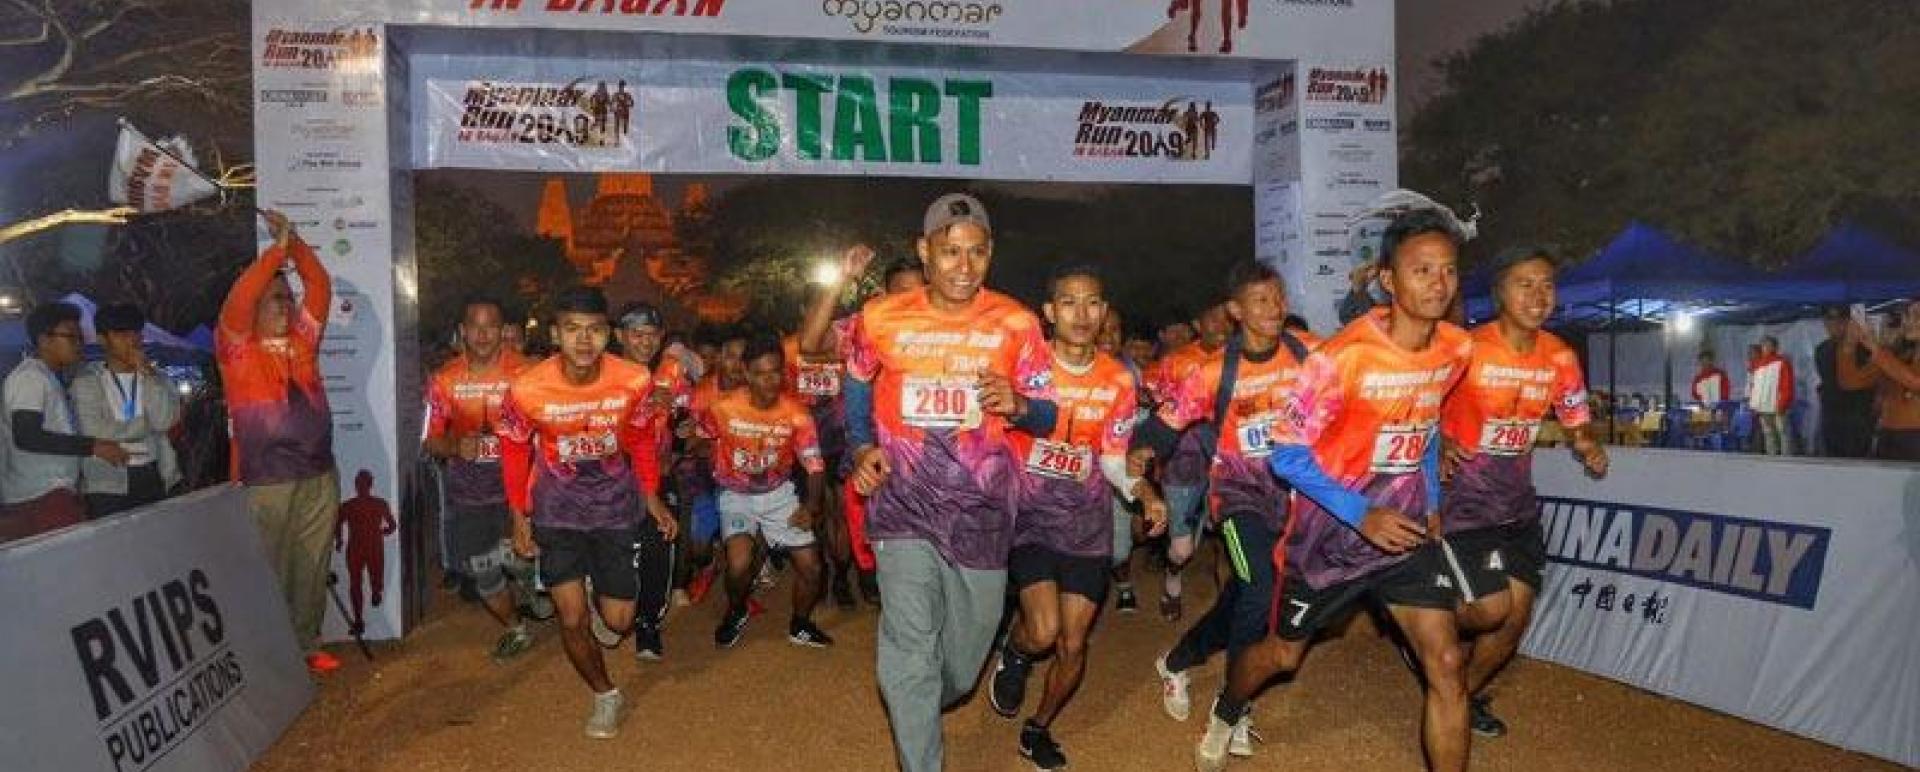 Participants start from the start line at Ananda Pagoda in full gear, in the Myanmar Run held in Bagan, Myanmar, Dec 15, 2019. (EDMOND TANG/CHINA DAILY)